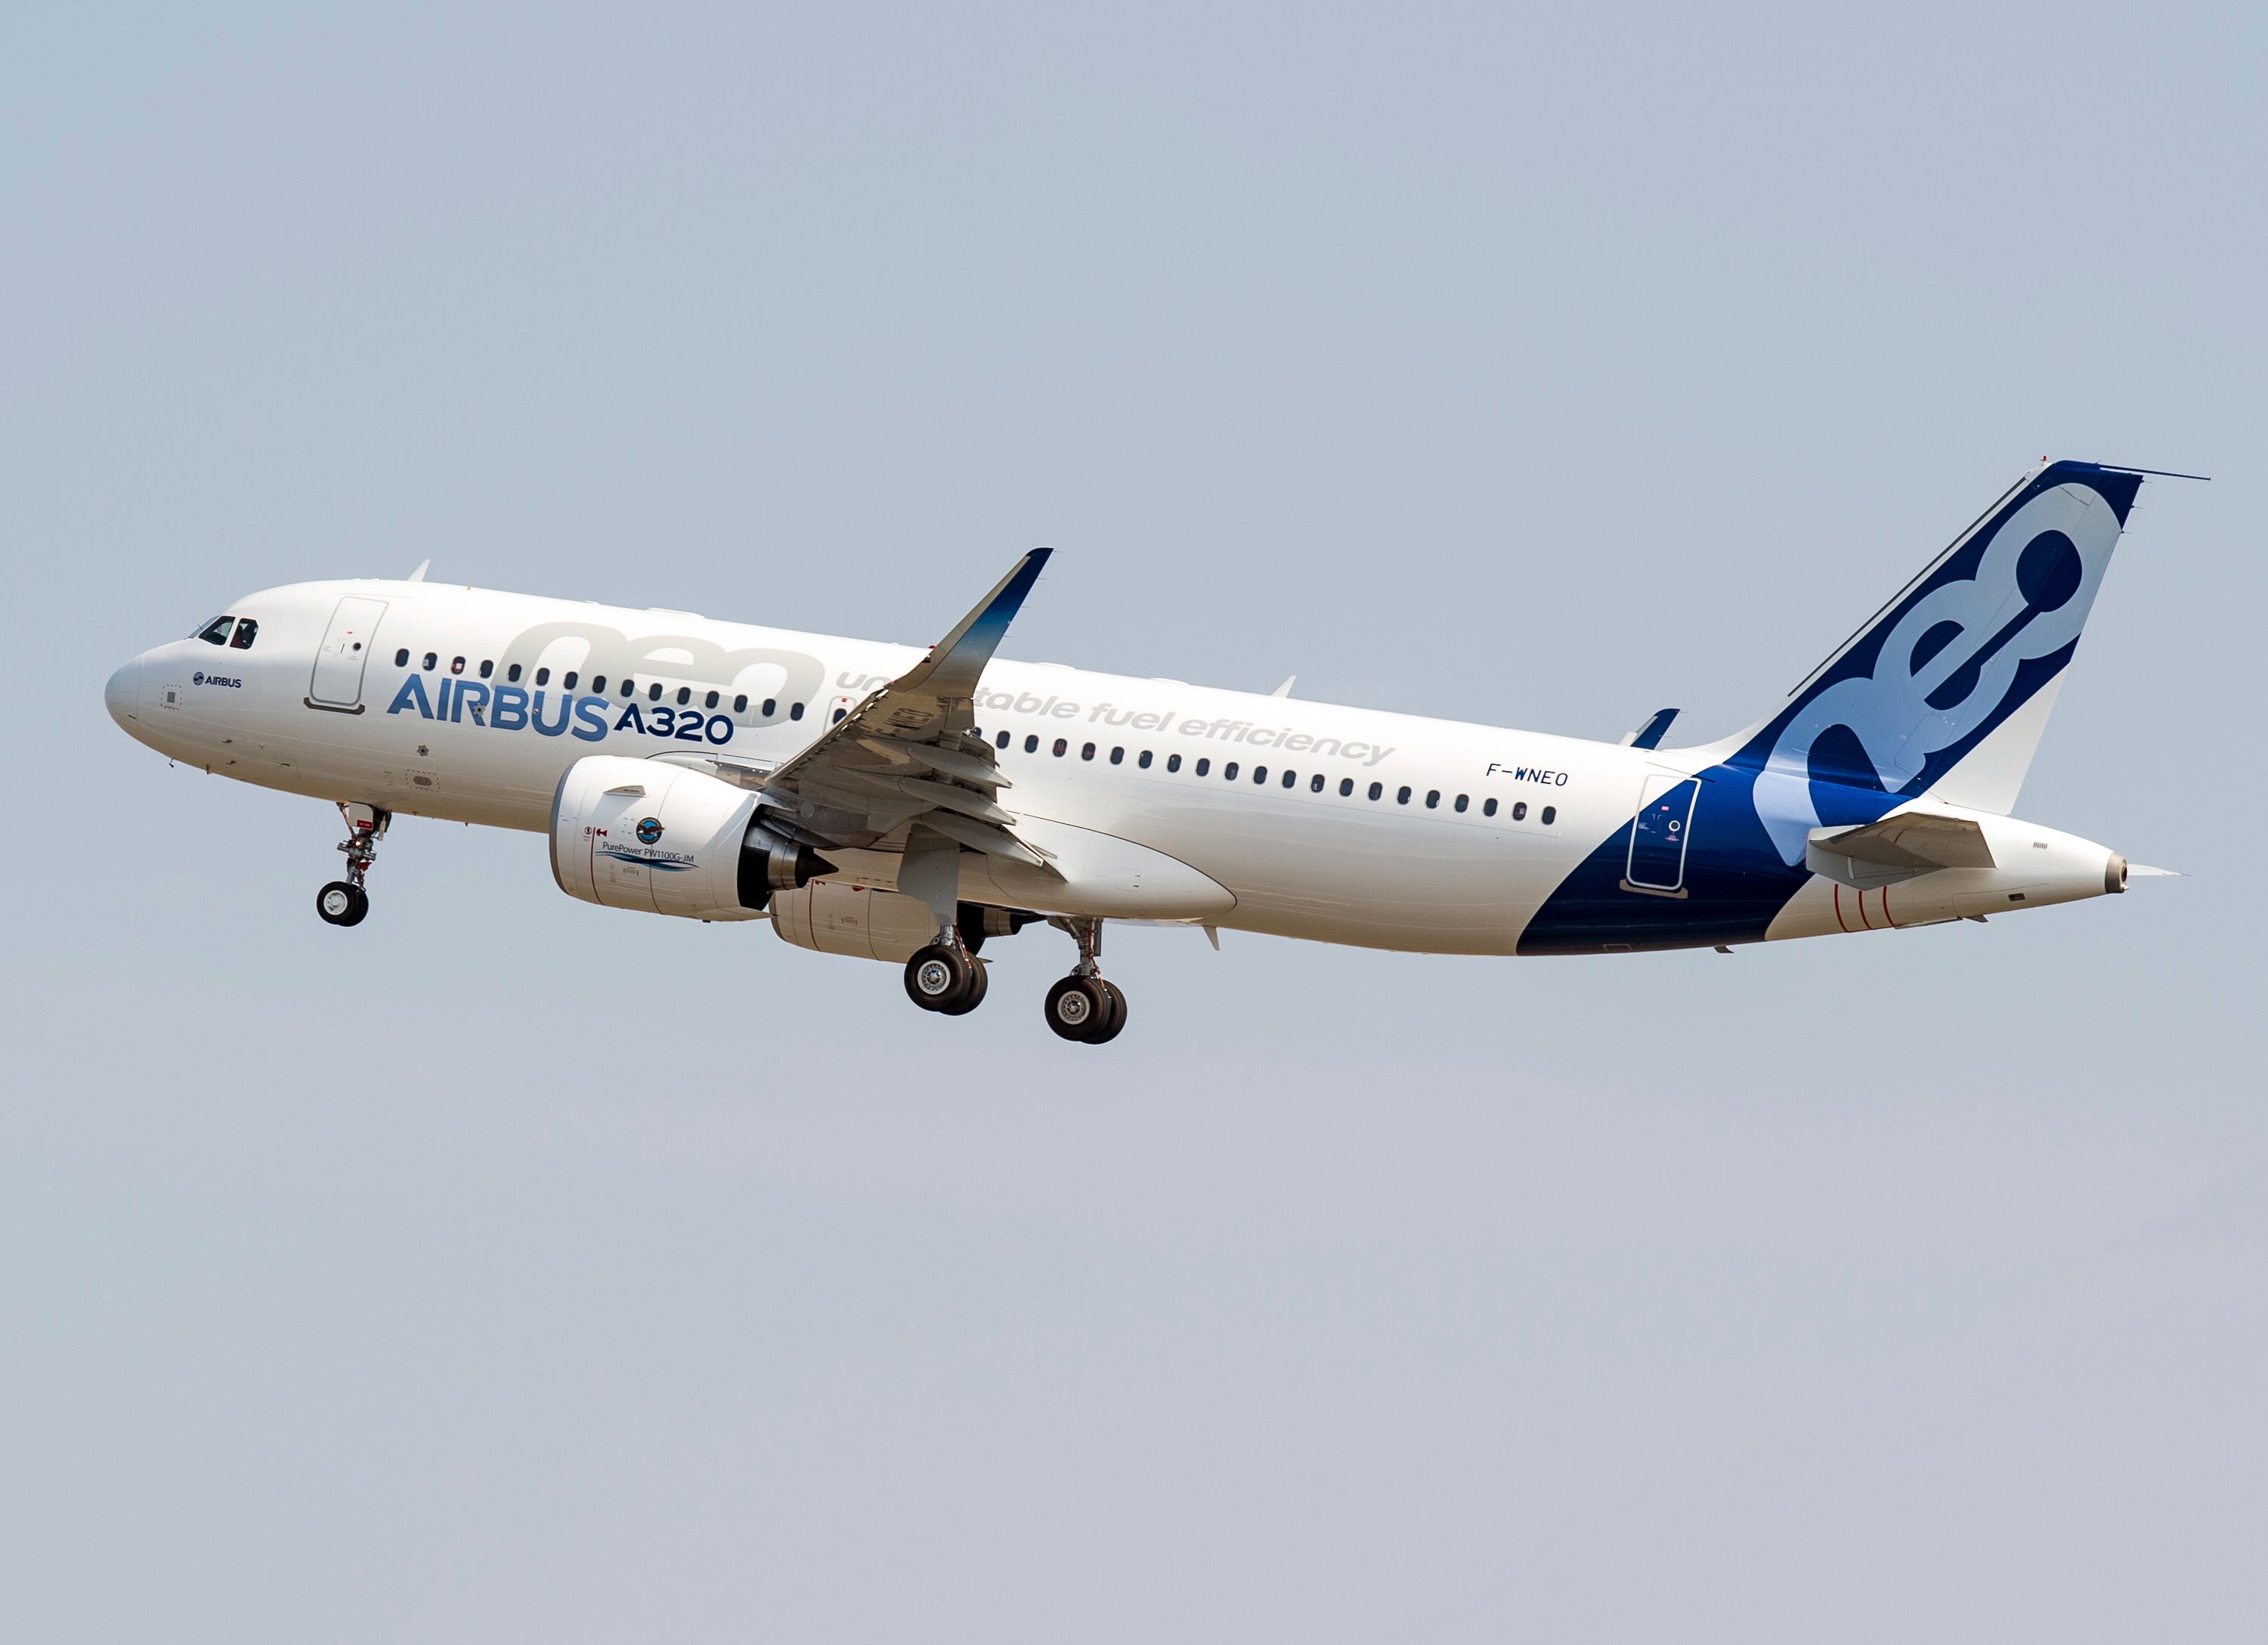 The new Airbus A320neo takes off for its first test flight at Toulouse-Blagnac airport, southwestern France